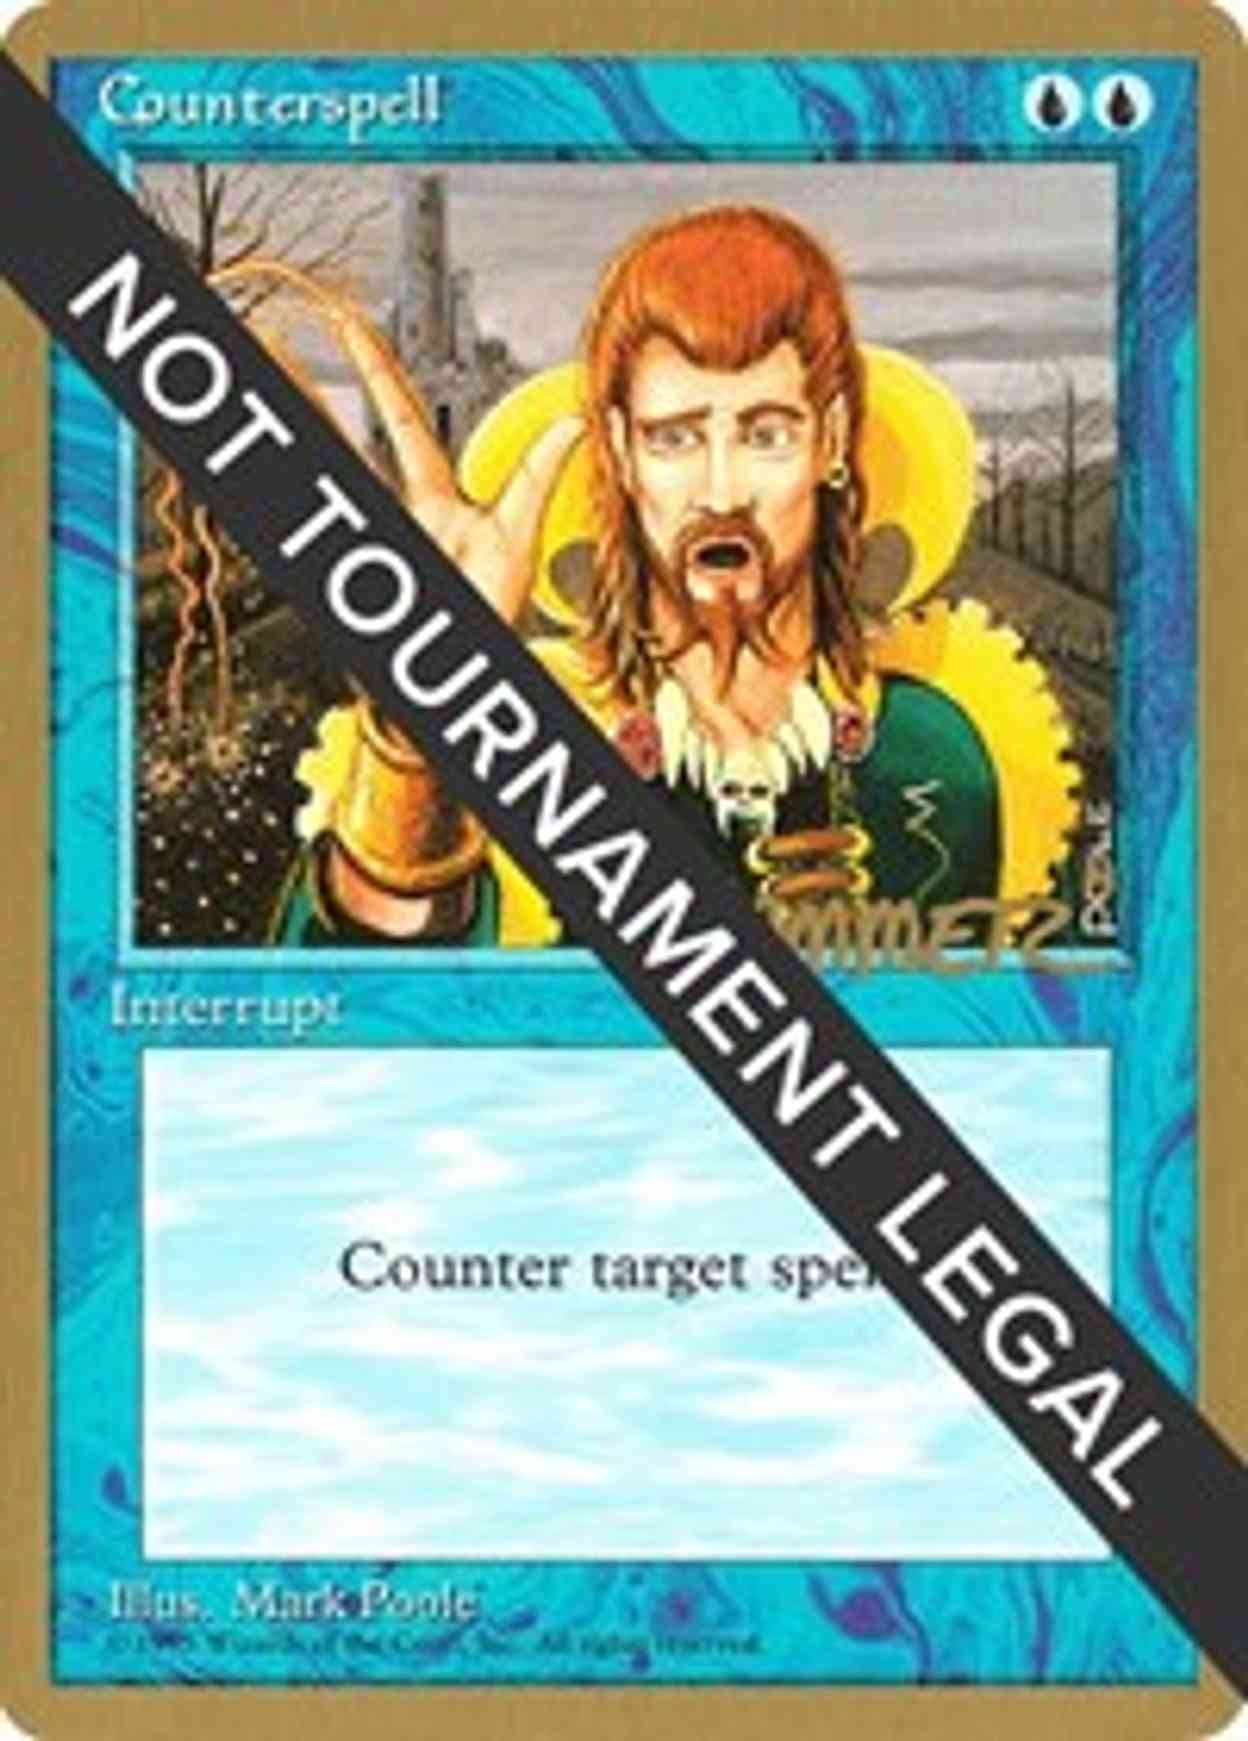 Counterspell - 1996 Shawn "Hammer" Regnier (4ED) magic card front